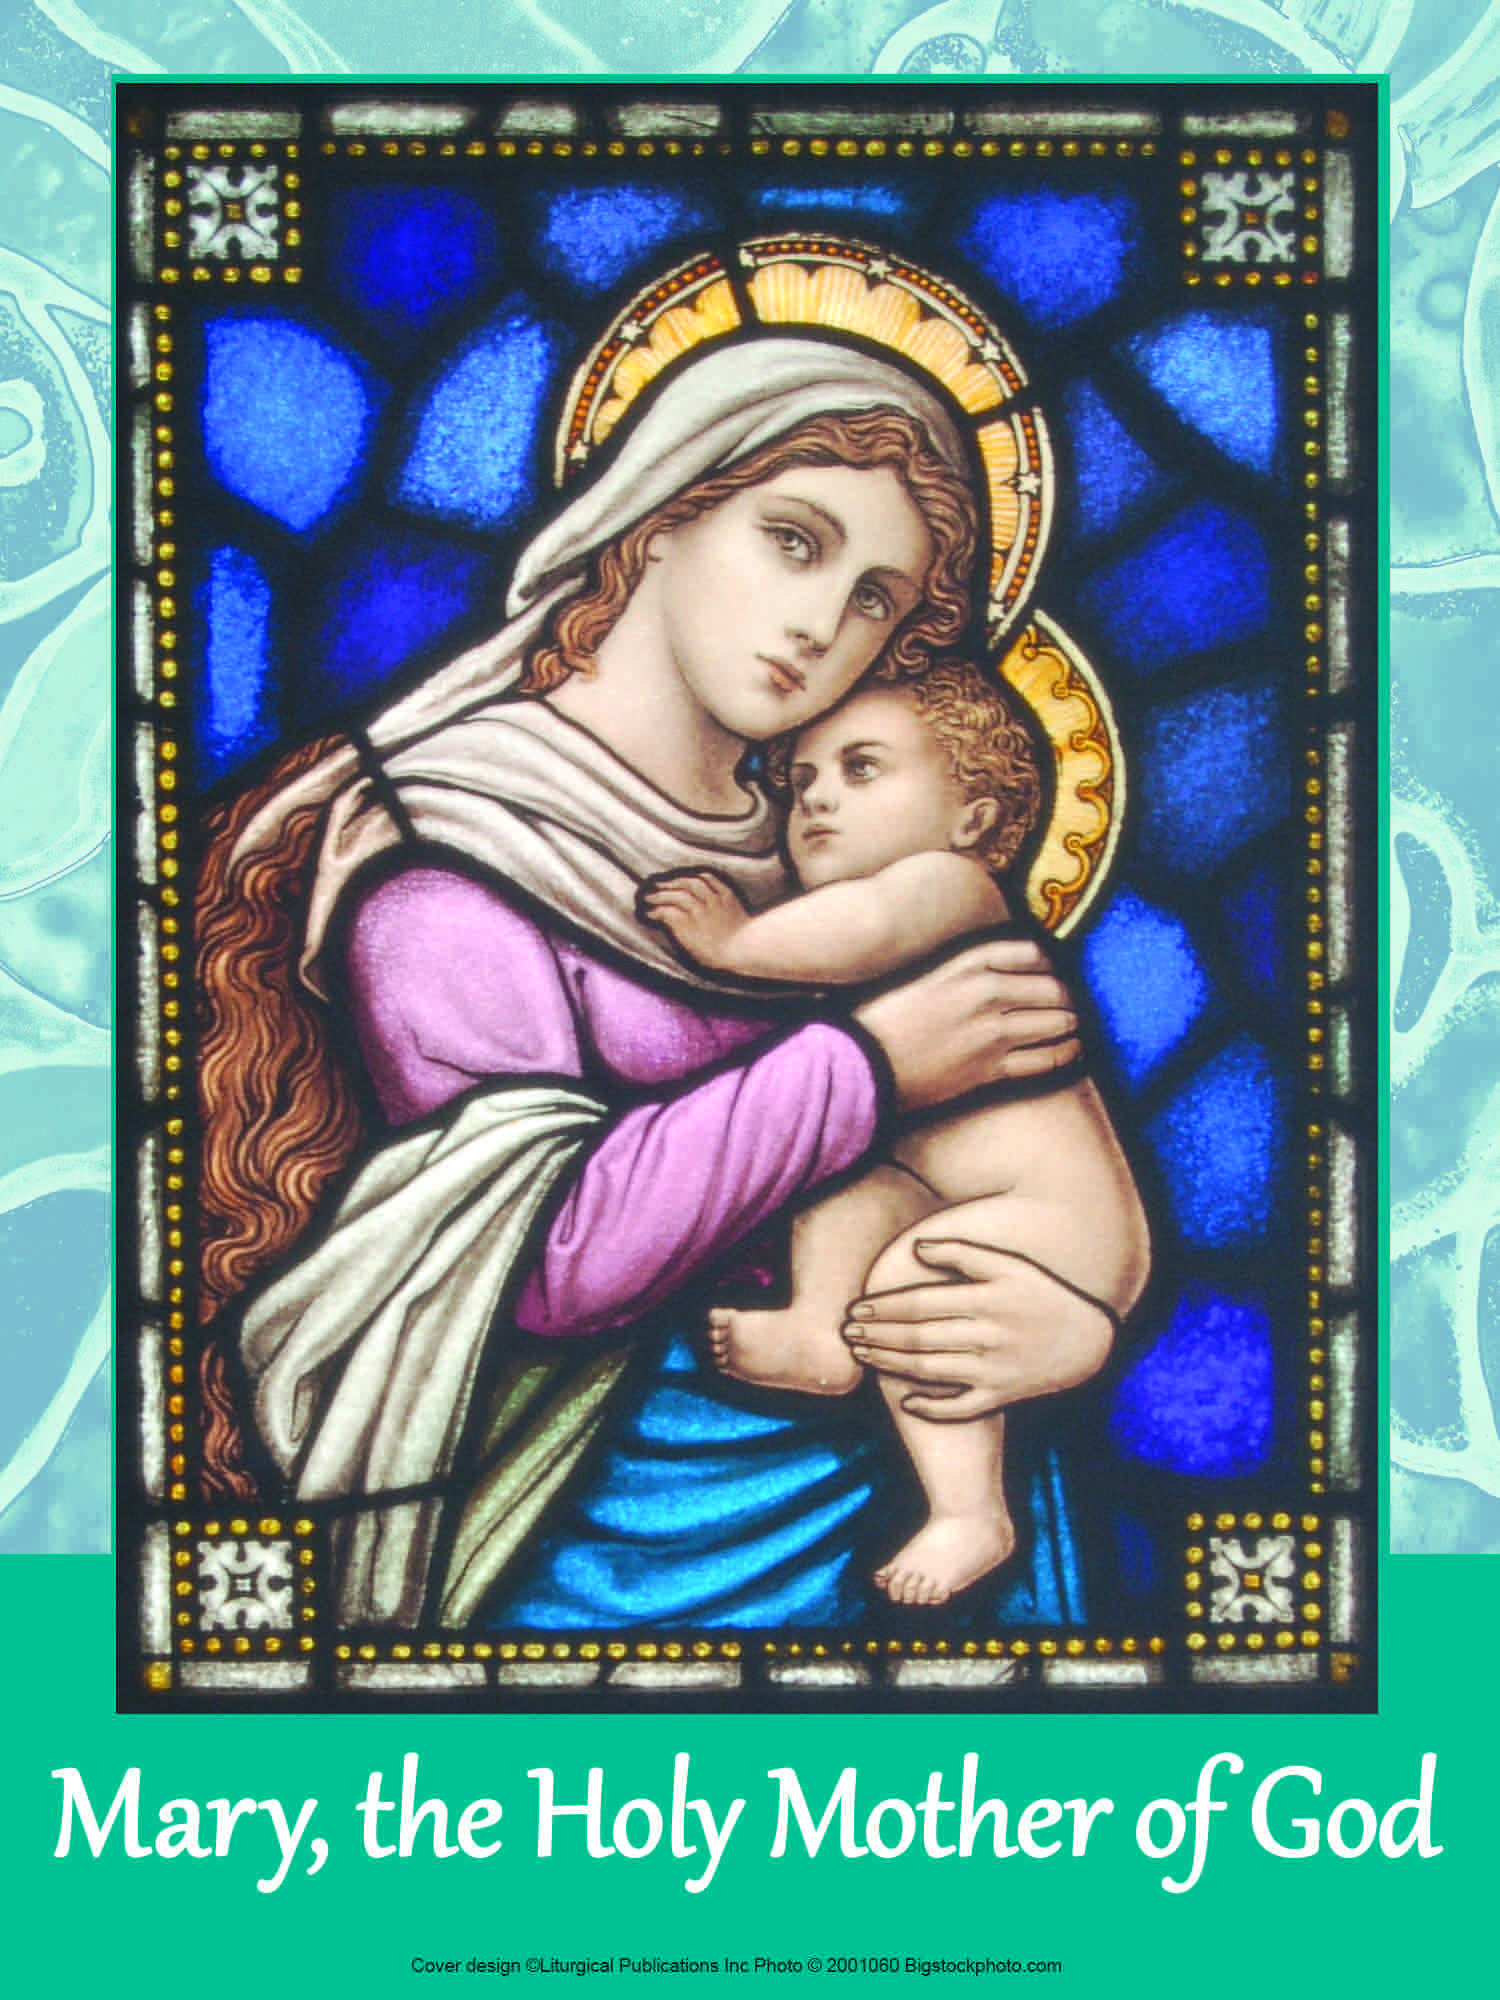 Mary, Mother of God--Why We Celebrate Her Today